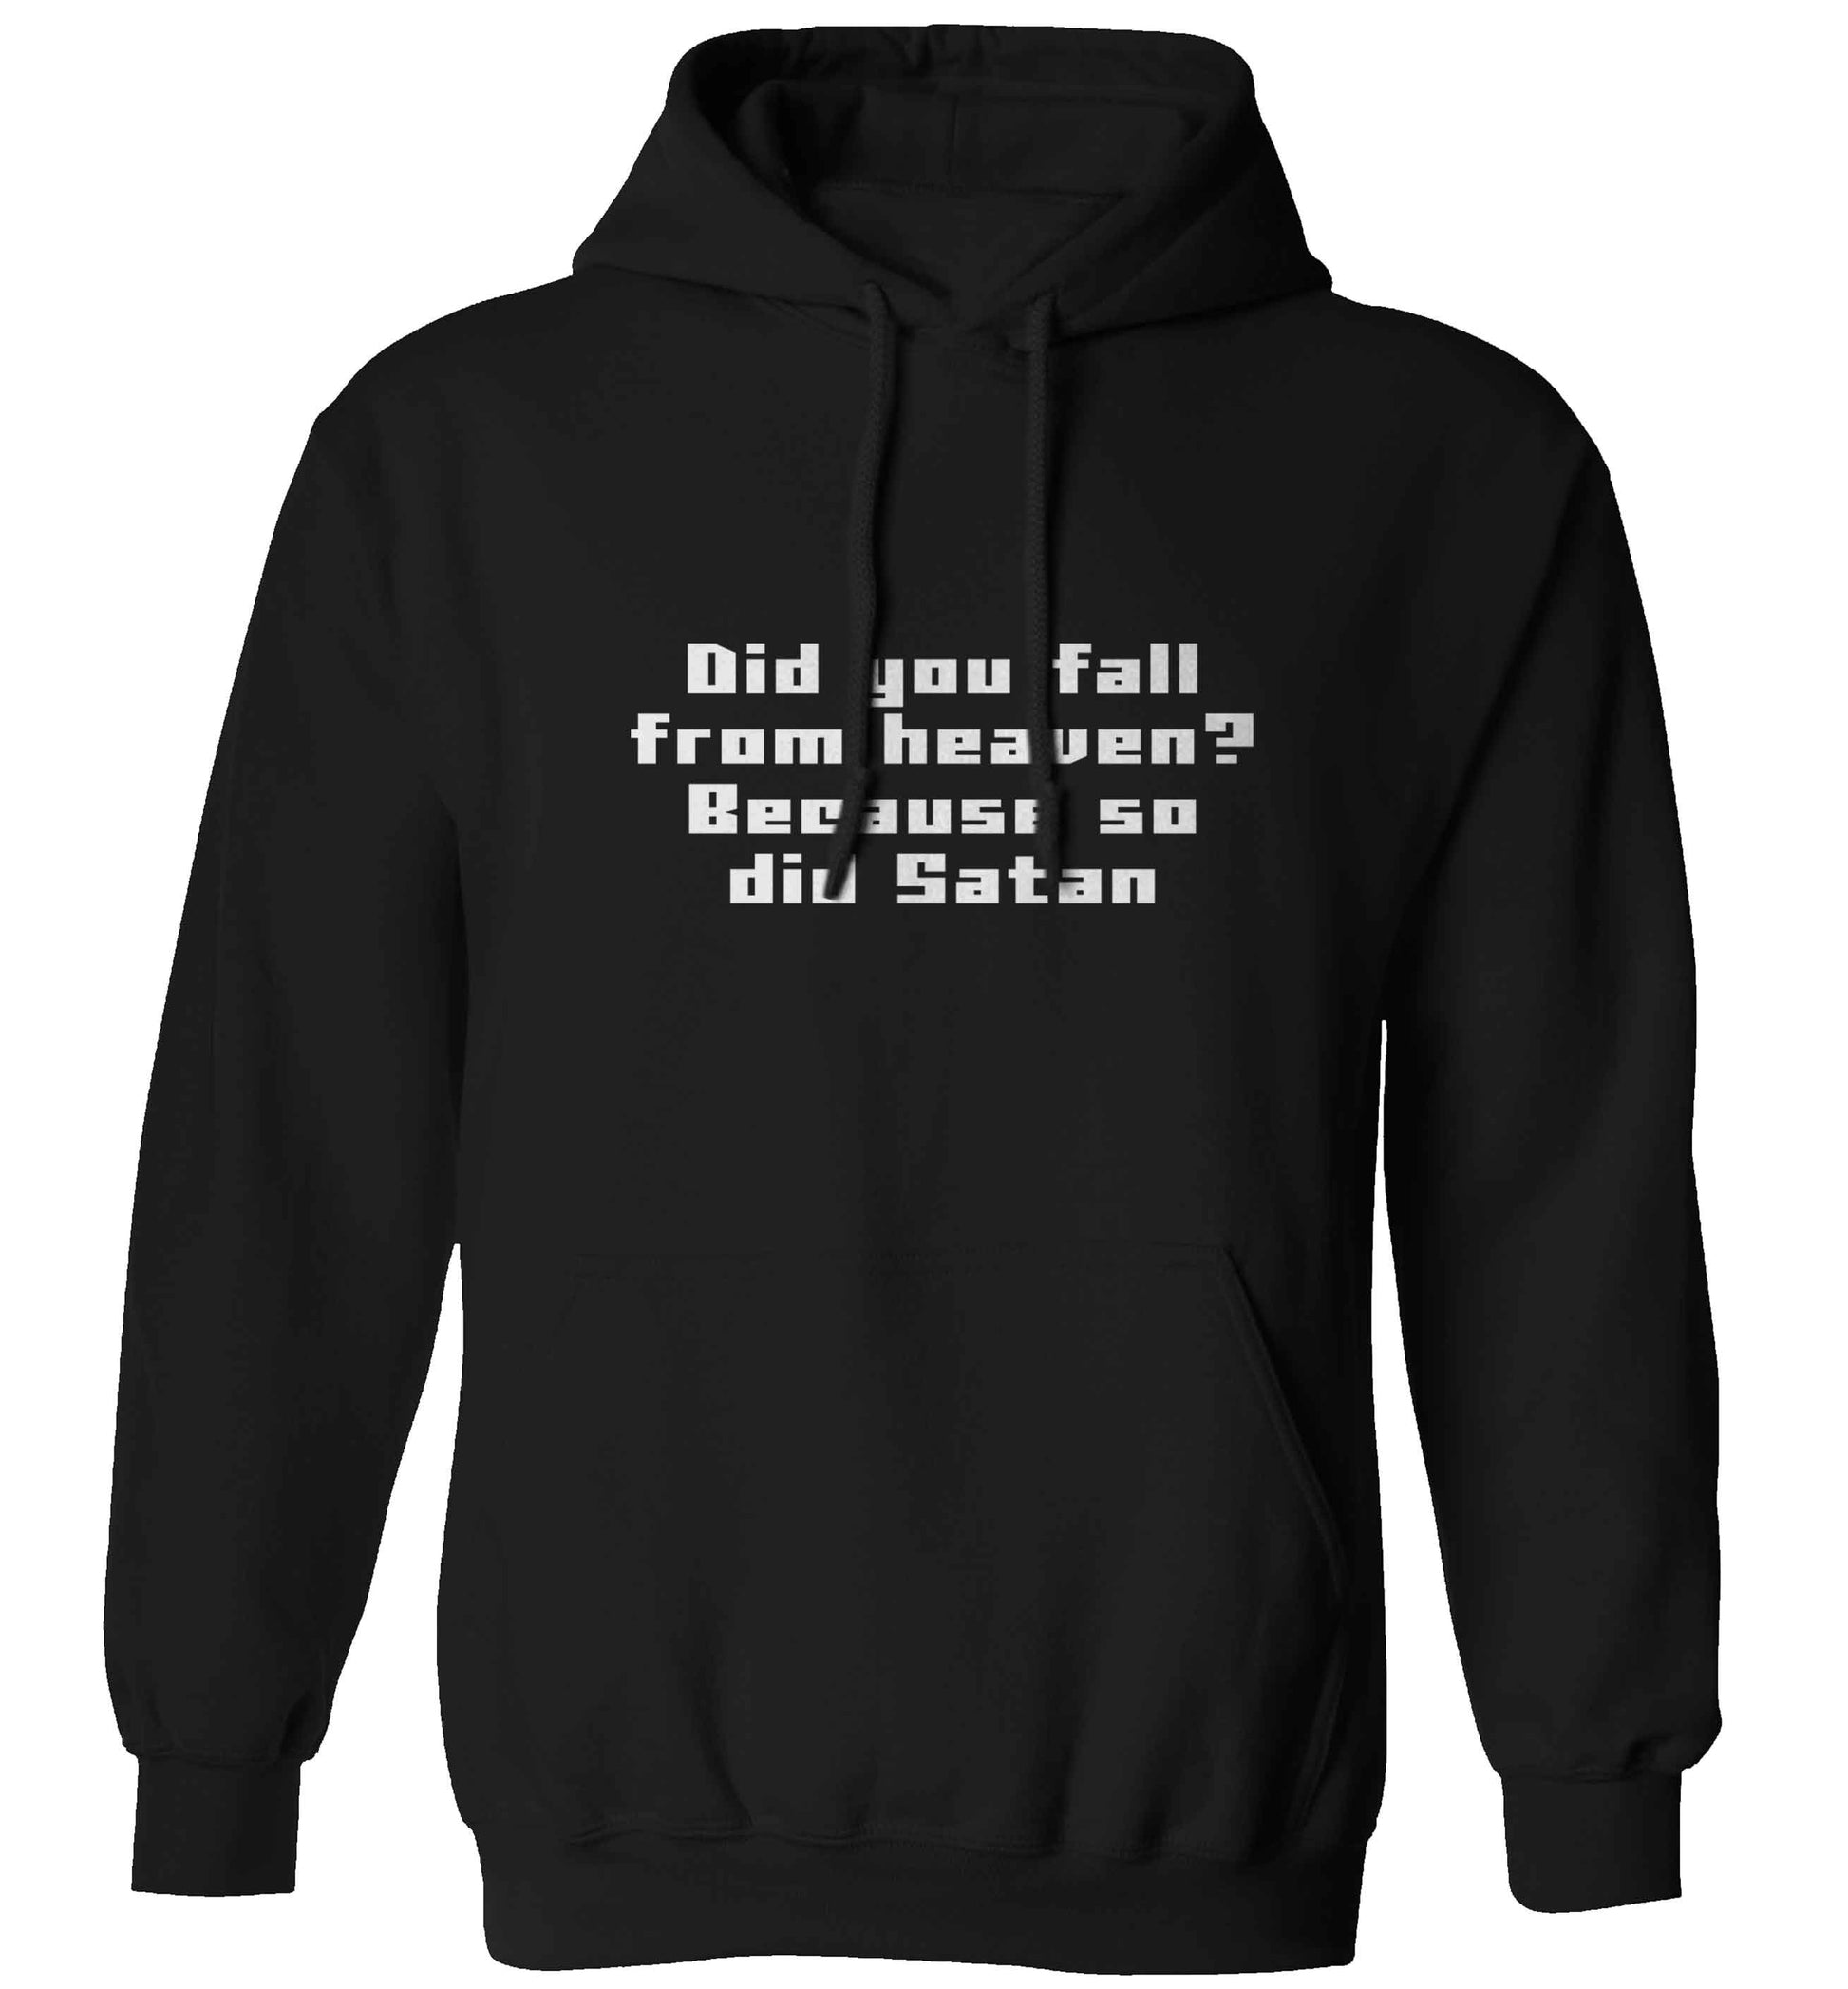 Did you fall from Heaven because so did Satan adults unisex black hoodie 2XL